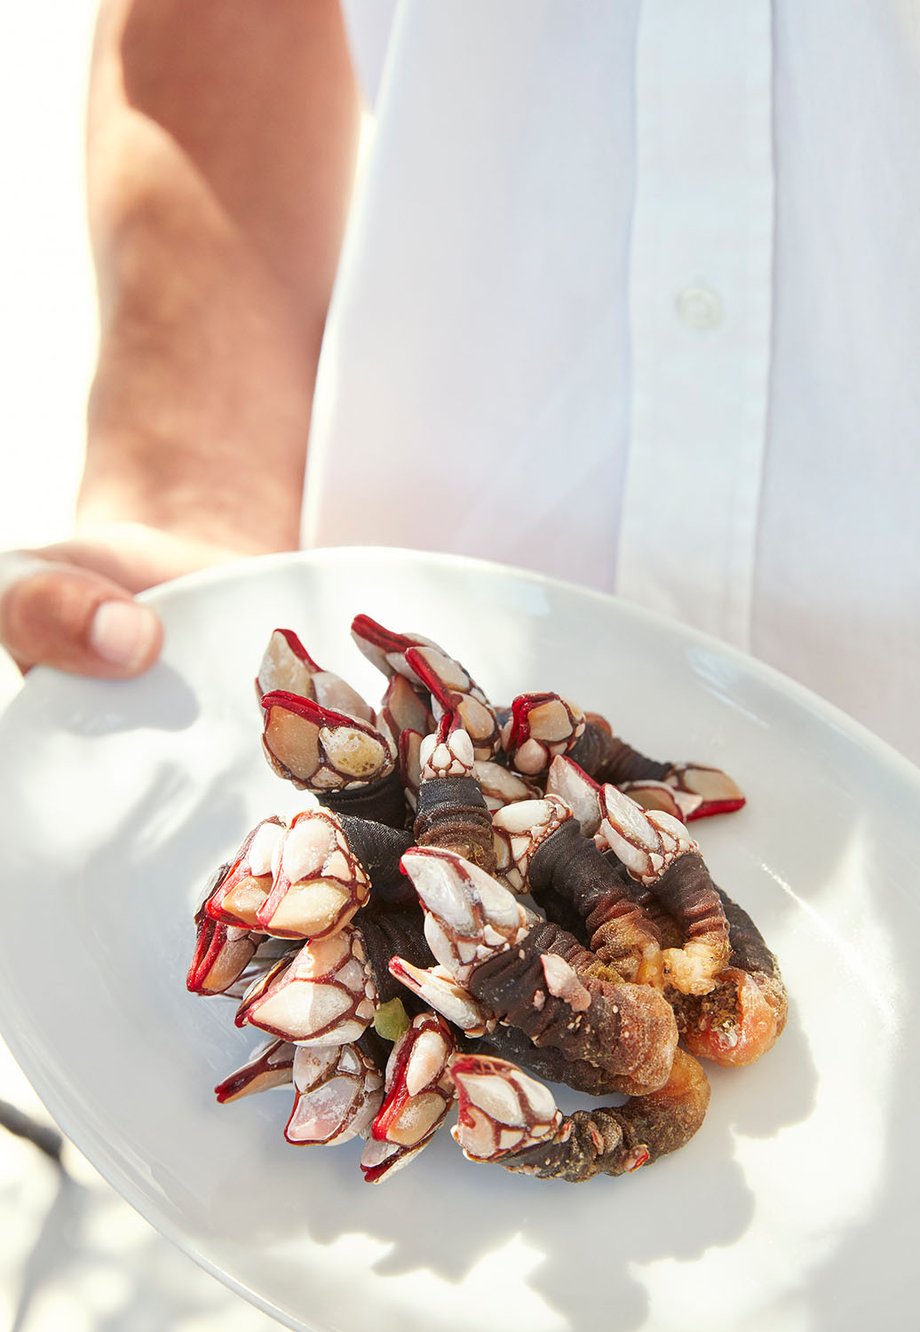 Richard James Taylor photographs seafood from the Algarve for National Geographic Traveller